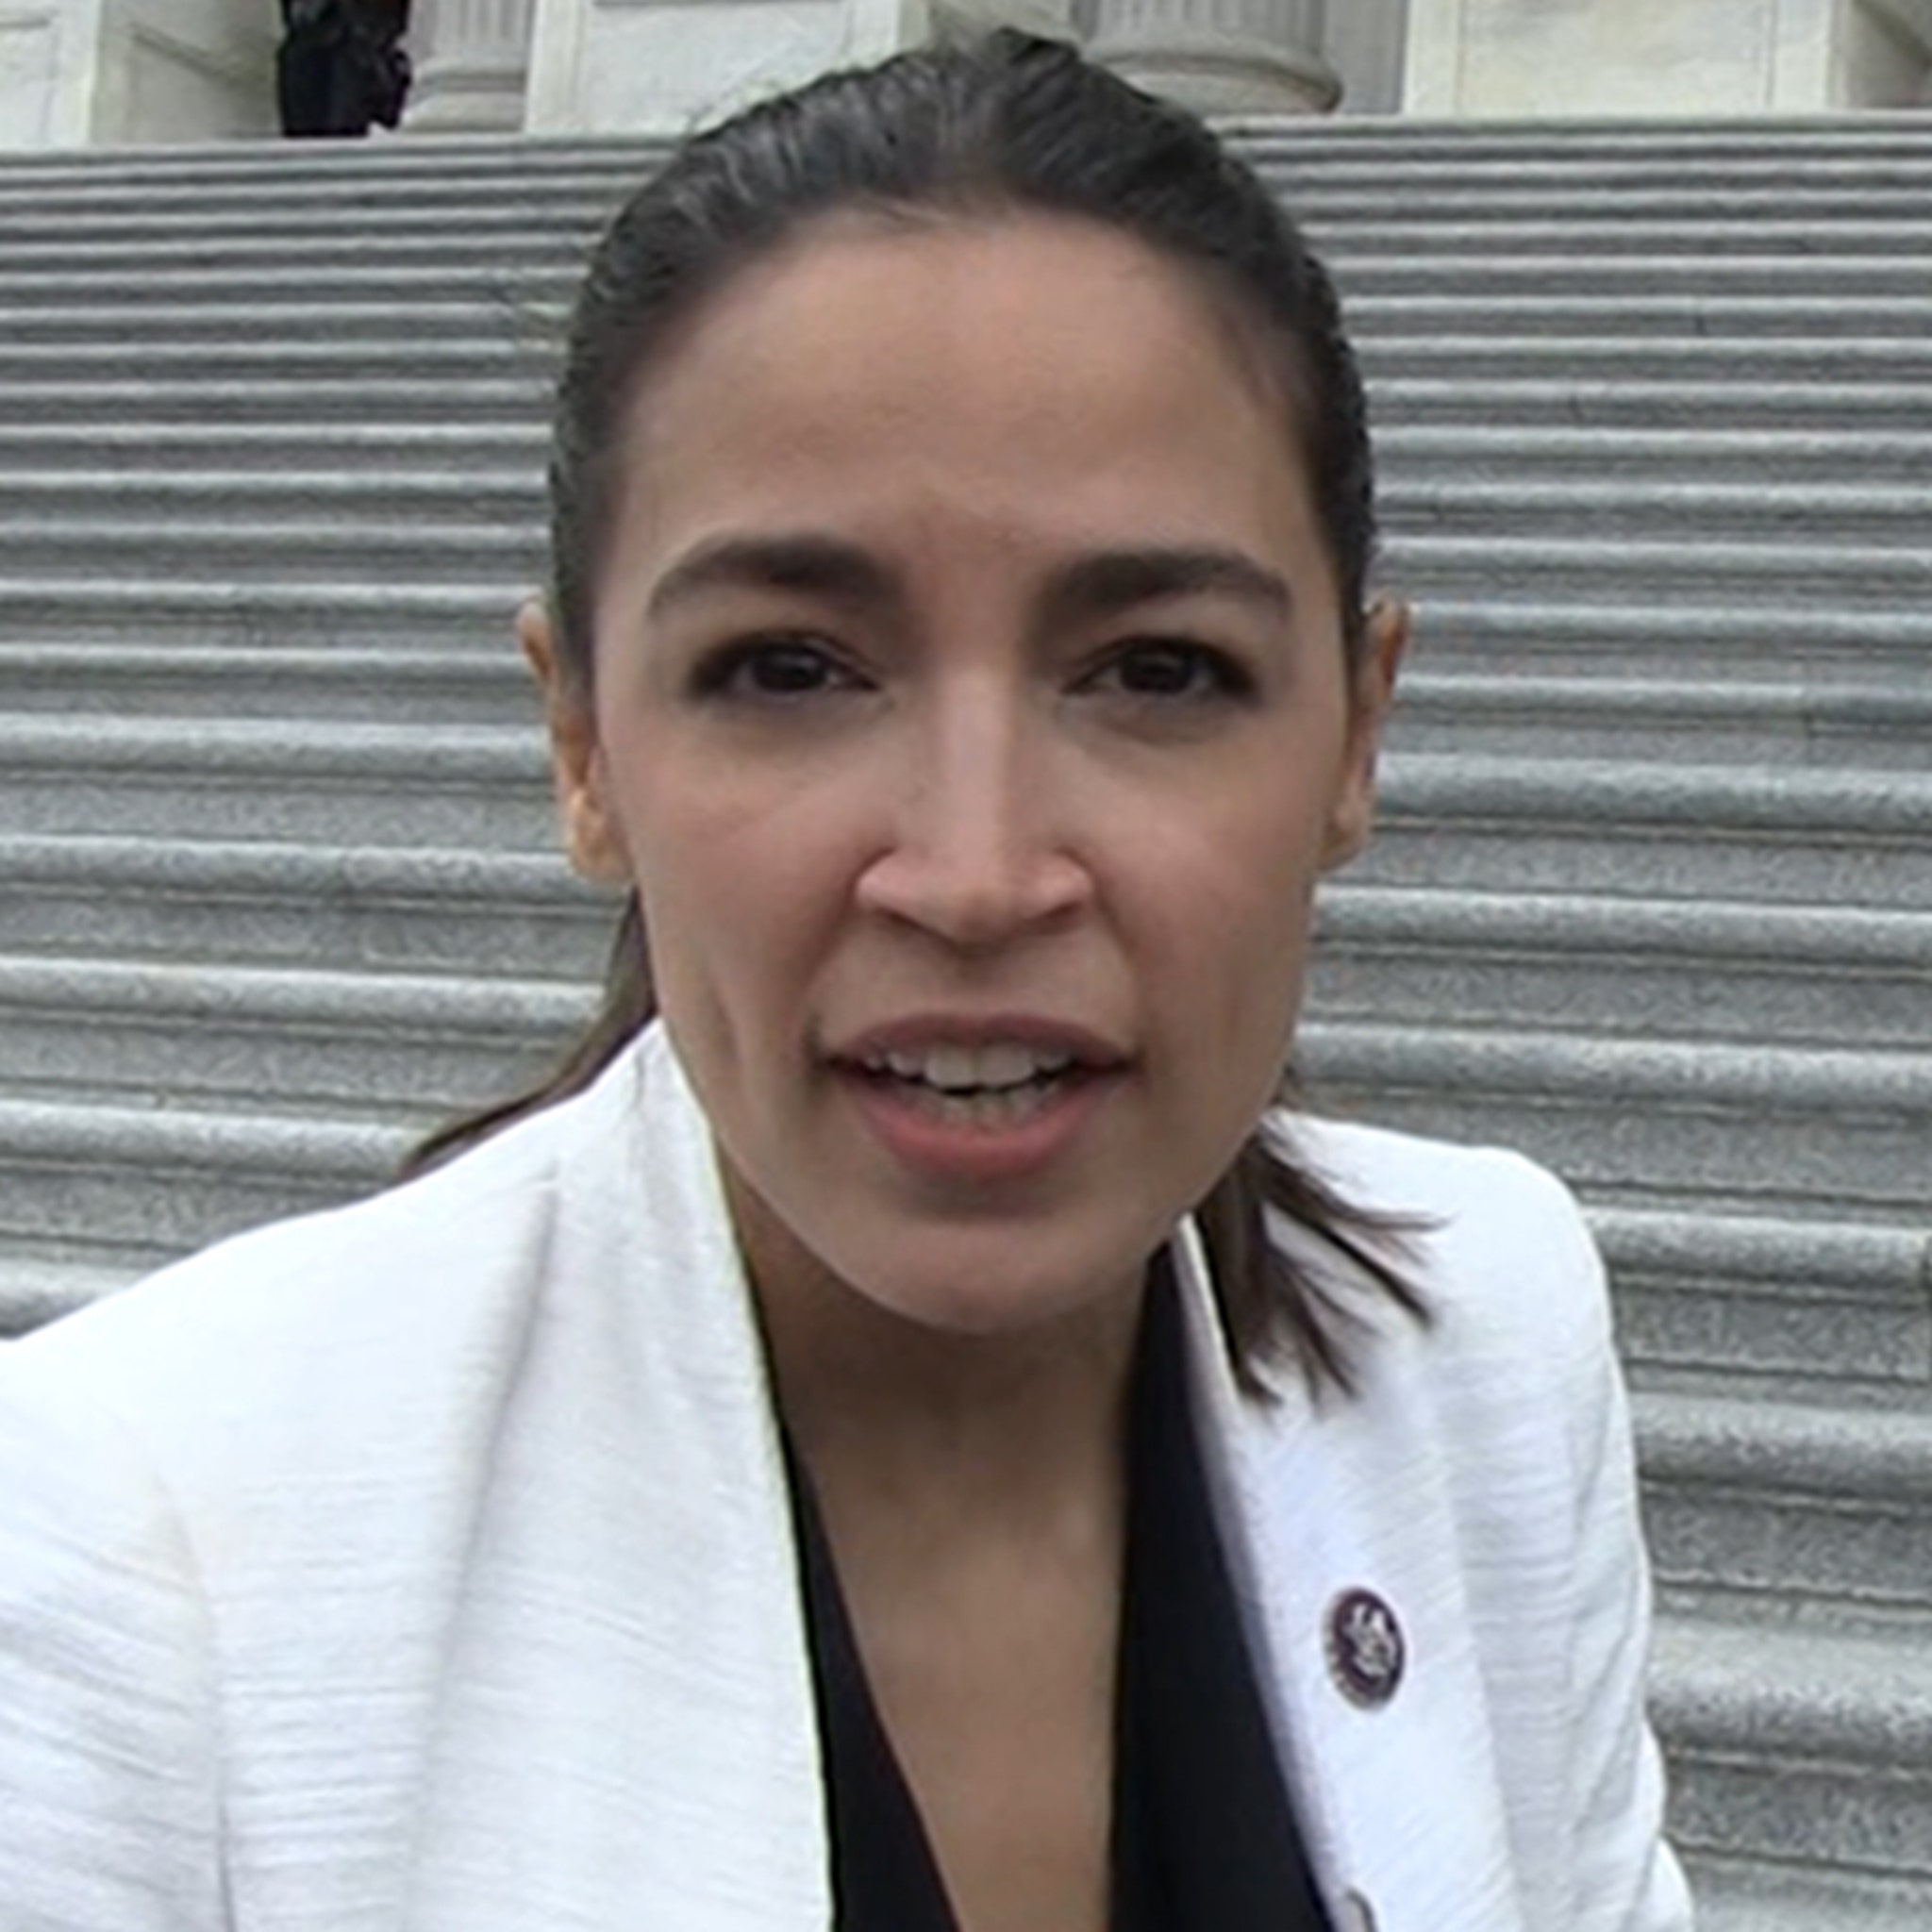 AOC Under Investigation For Possible Ethics Violations